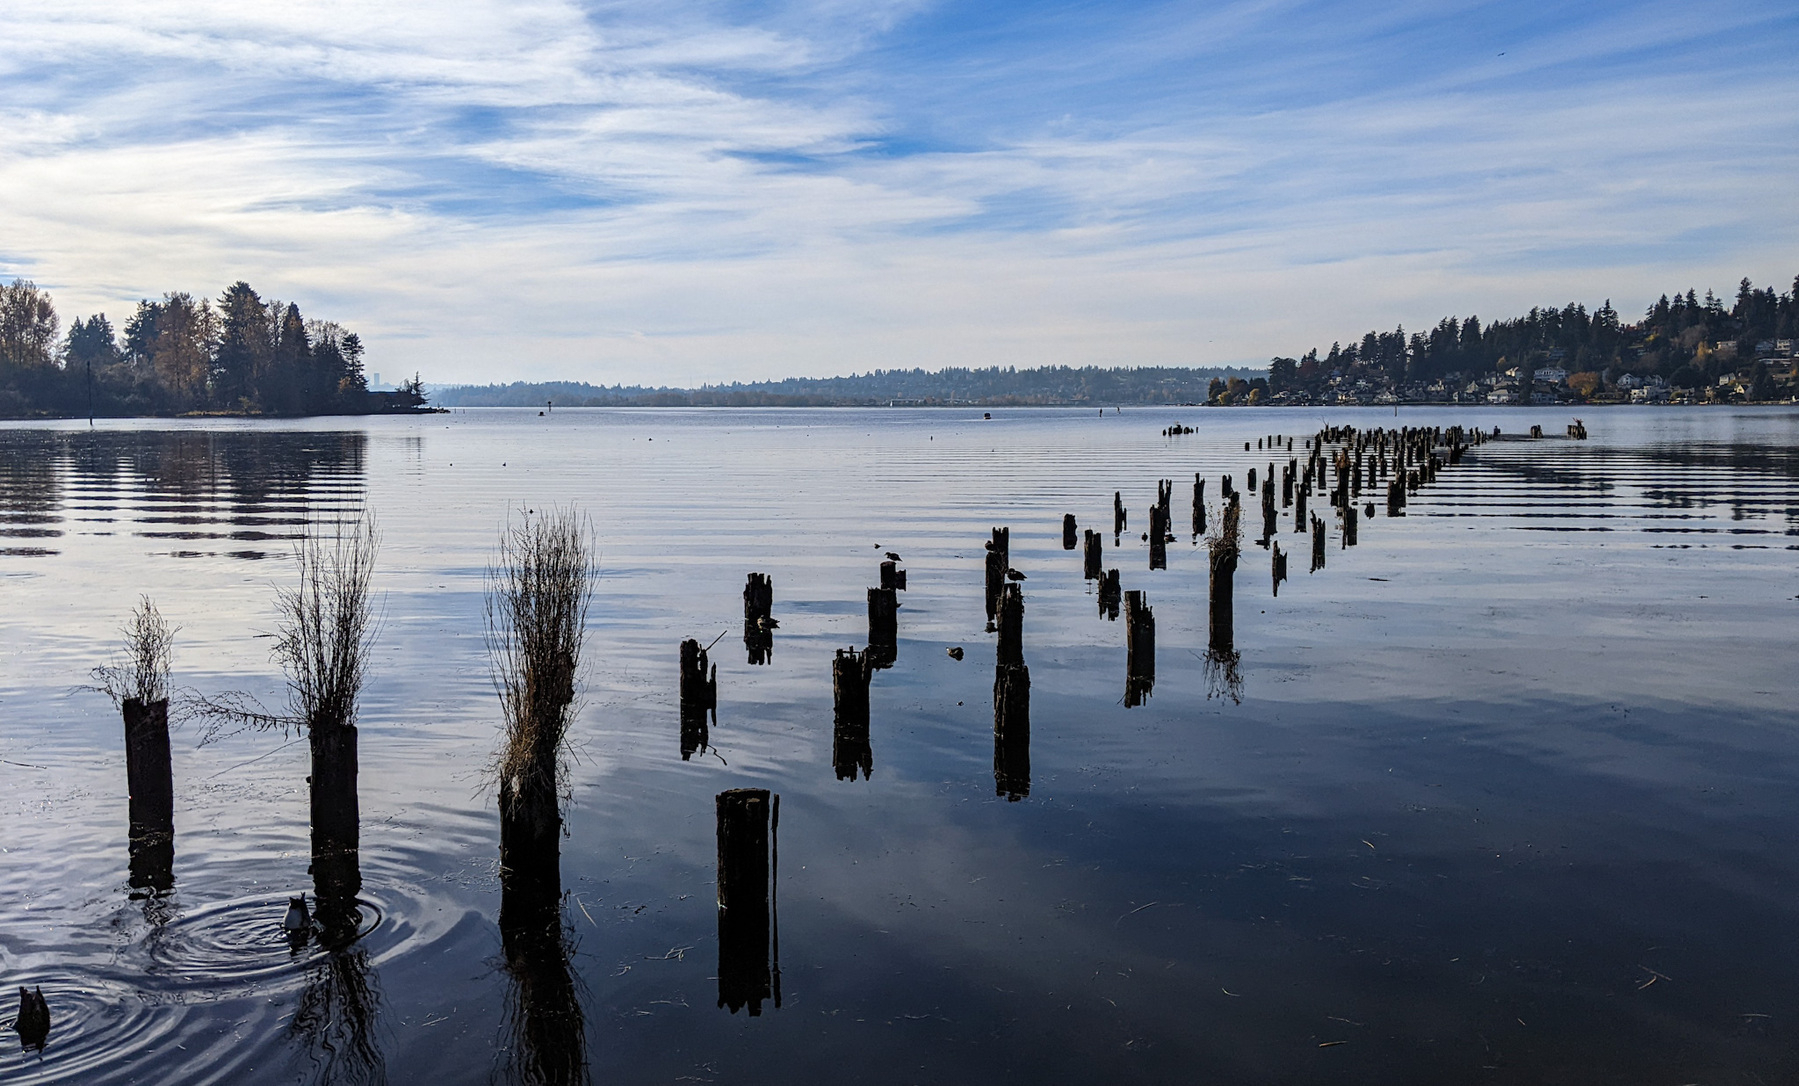 pilings cross a smooth late surface reflecting a blue sky slashed with clouds